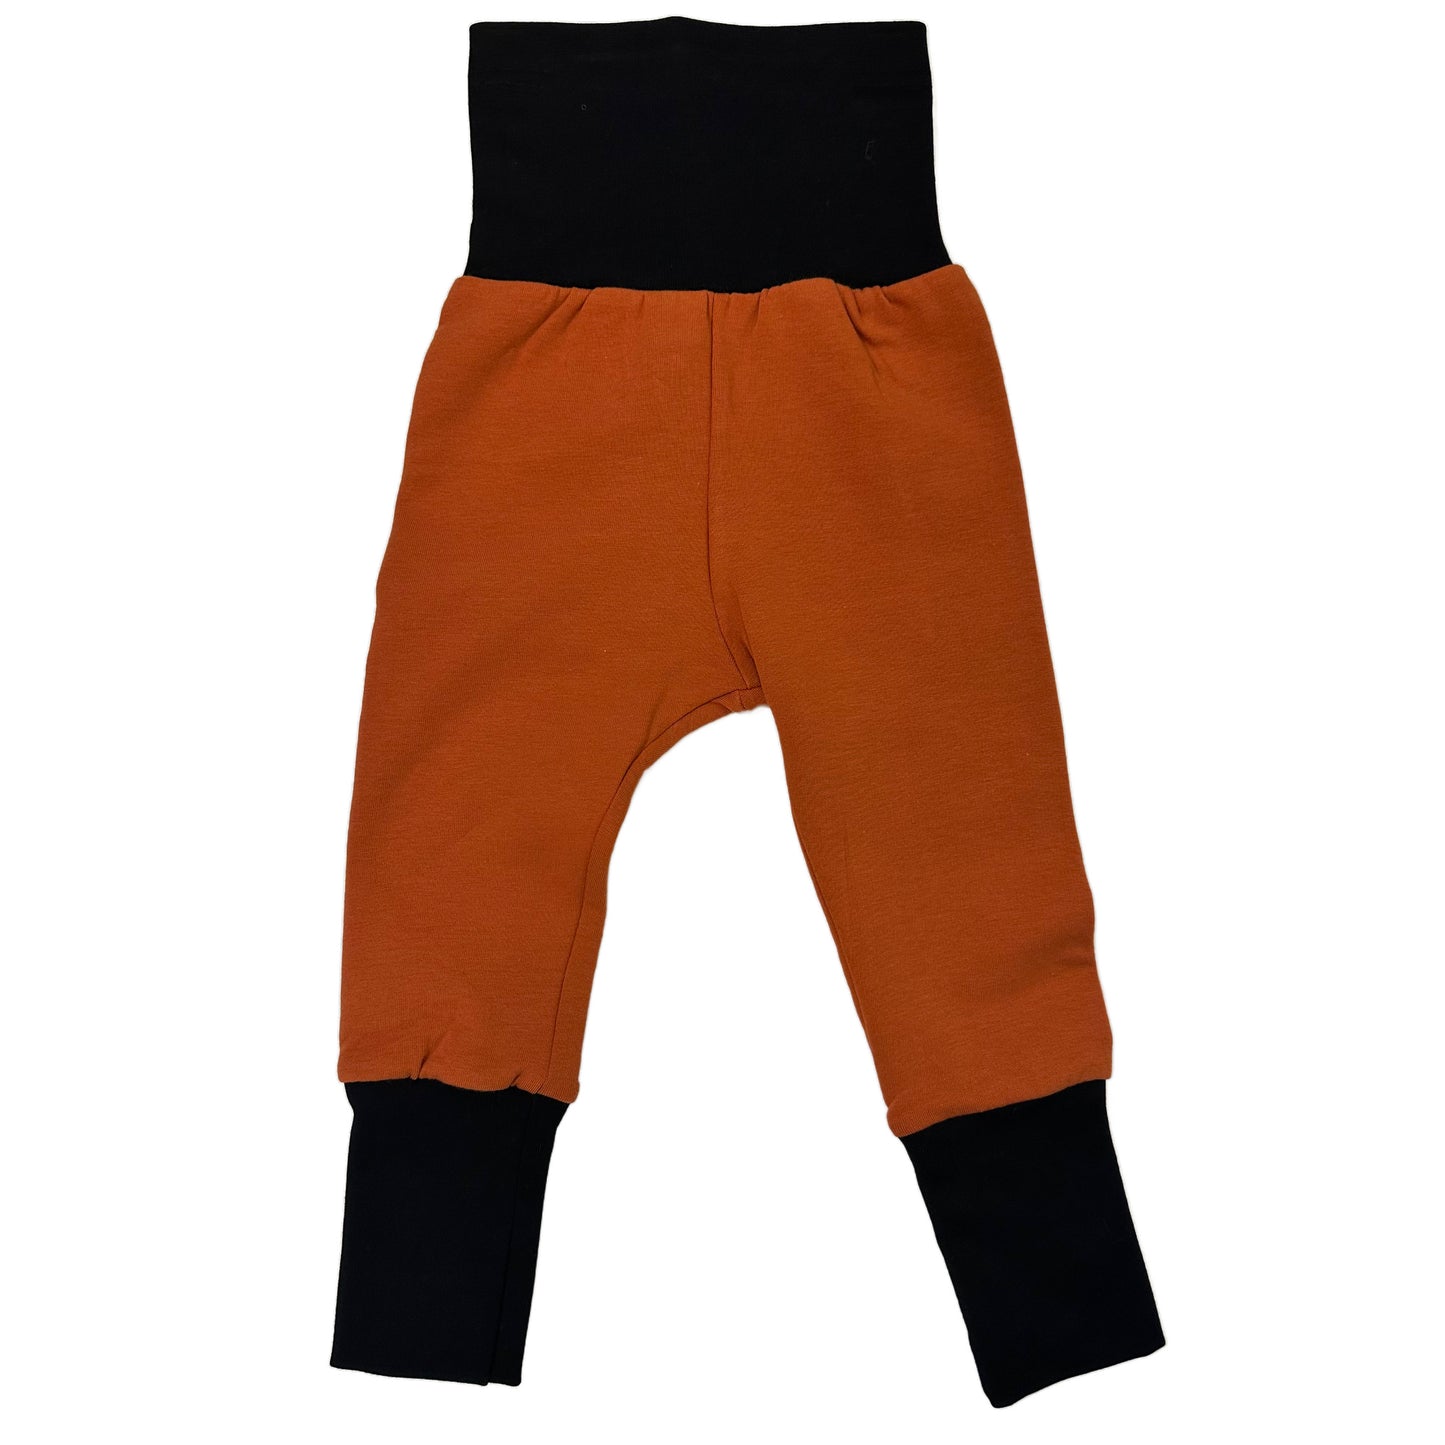 CLEARANCE Rust and Black Growth Spurt Jogger Pants